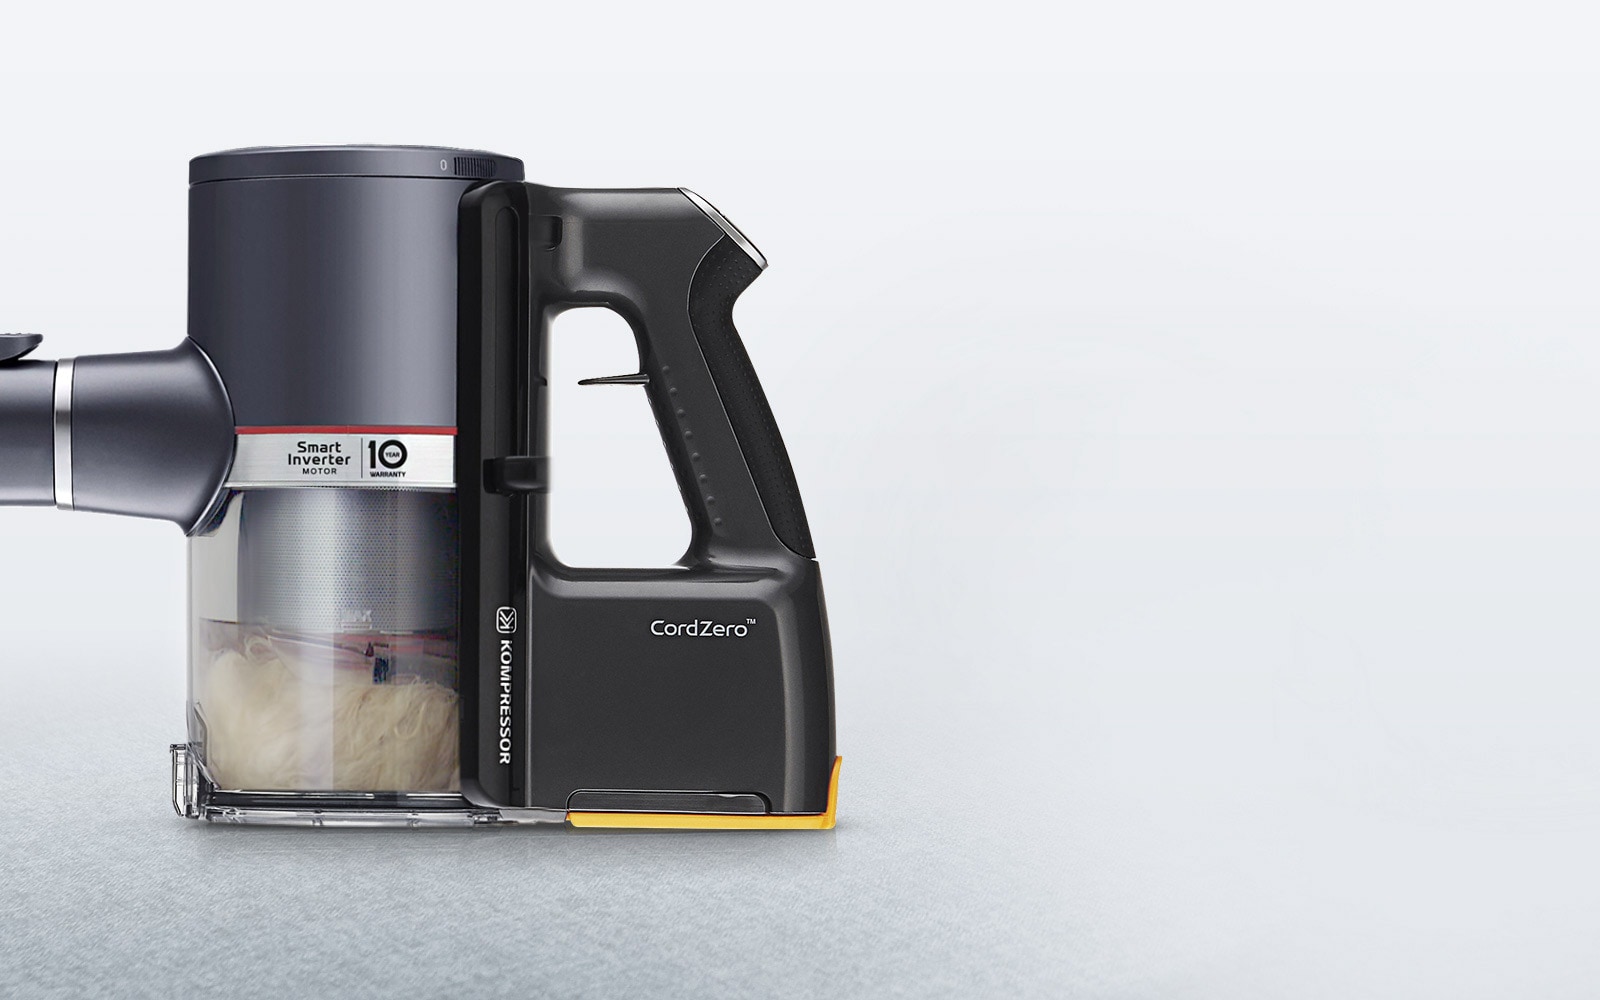 The side of the bin of the handstick vacuum cleaner is shown filling up with dust, the LG Kompressor™ is pushed down and shows more space in the bin.